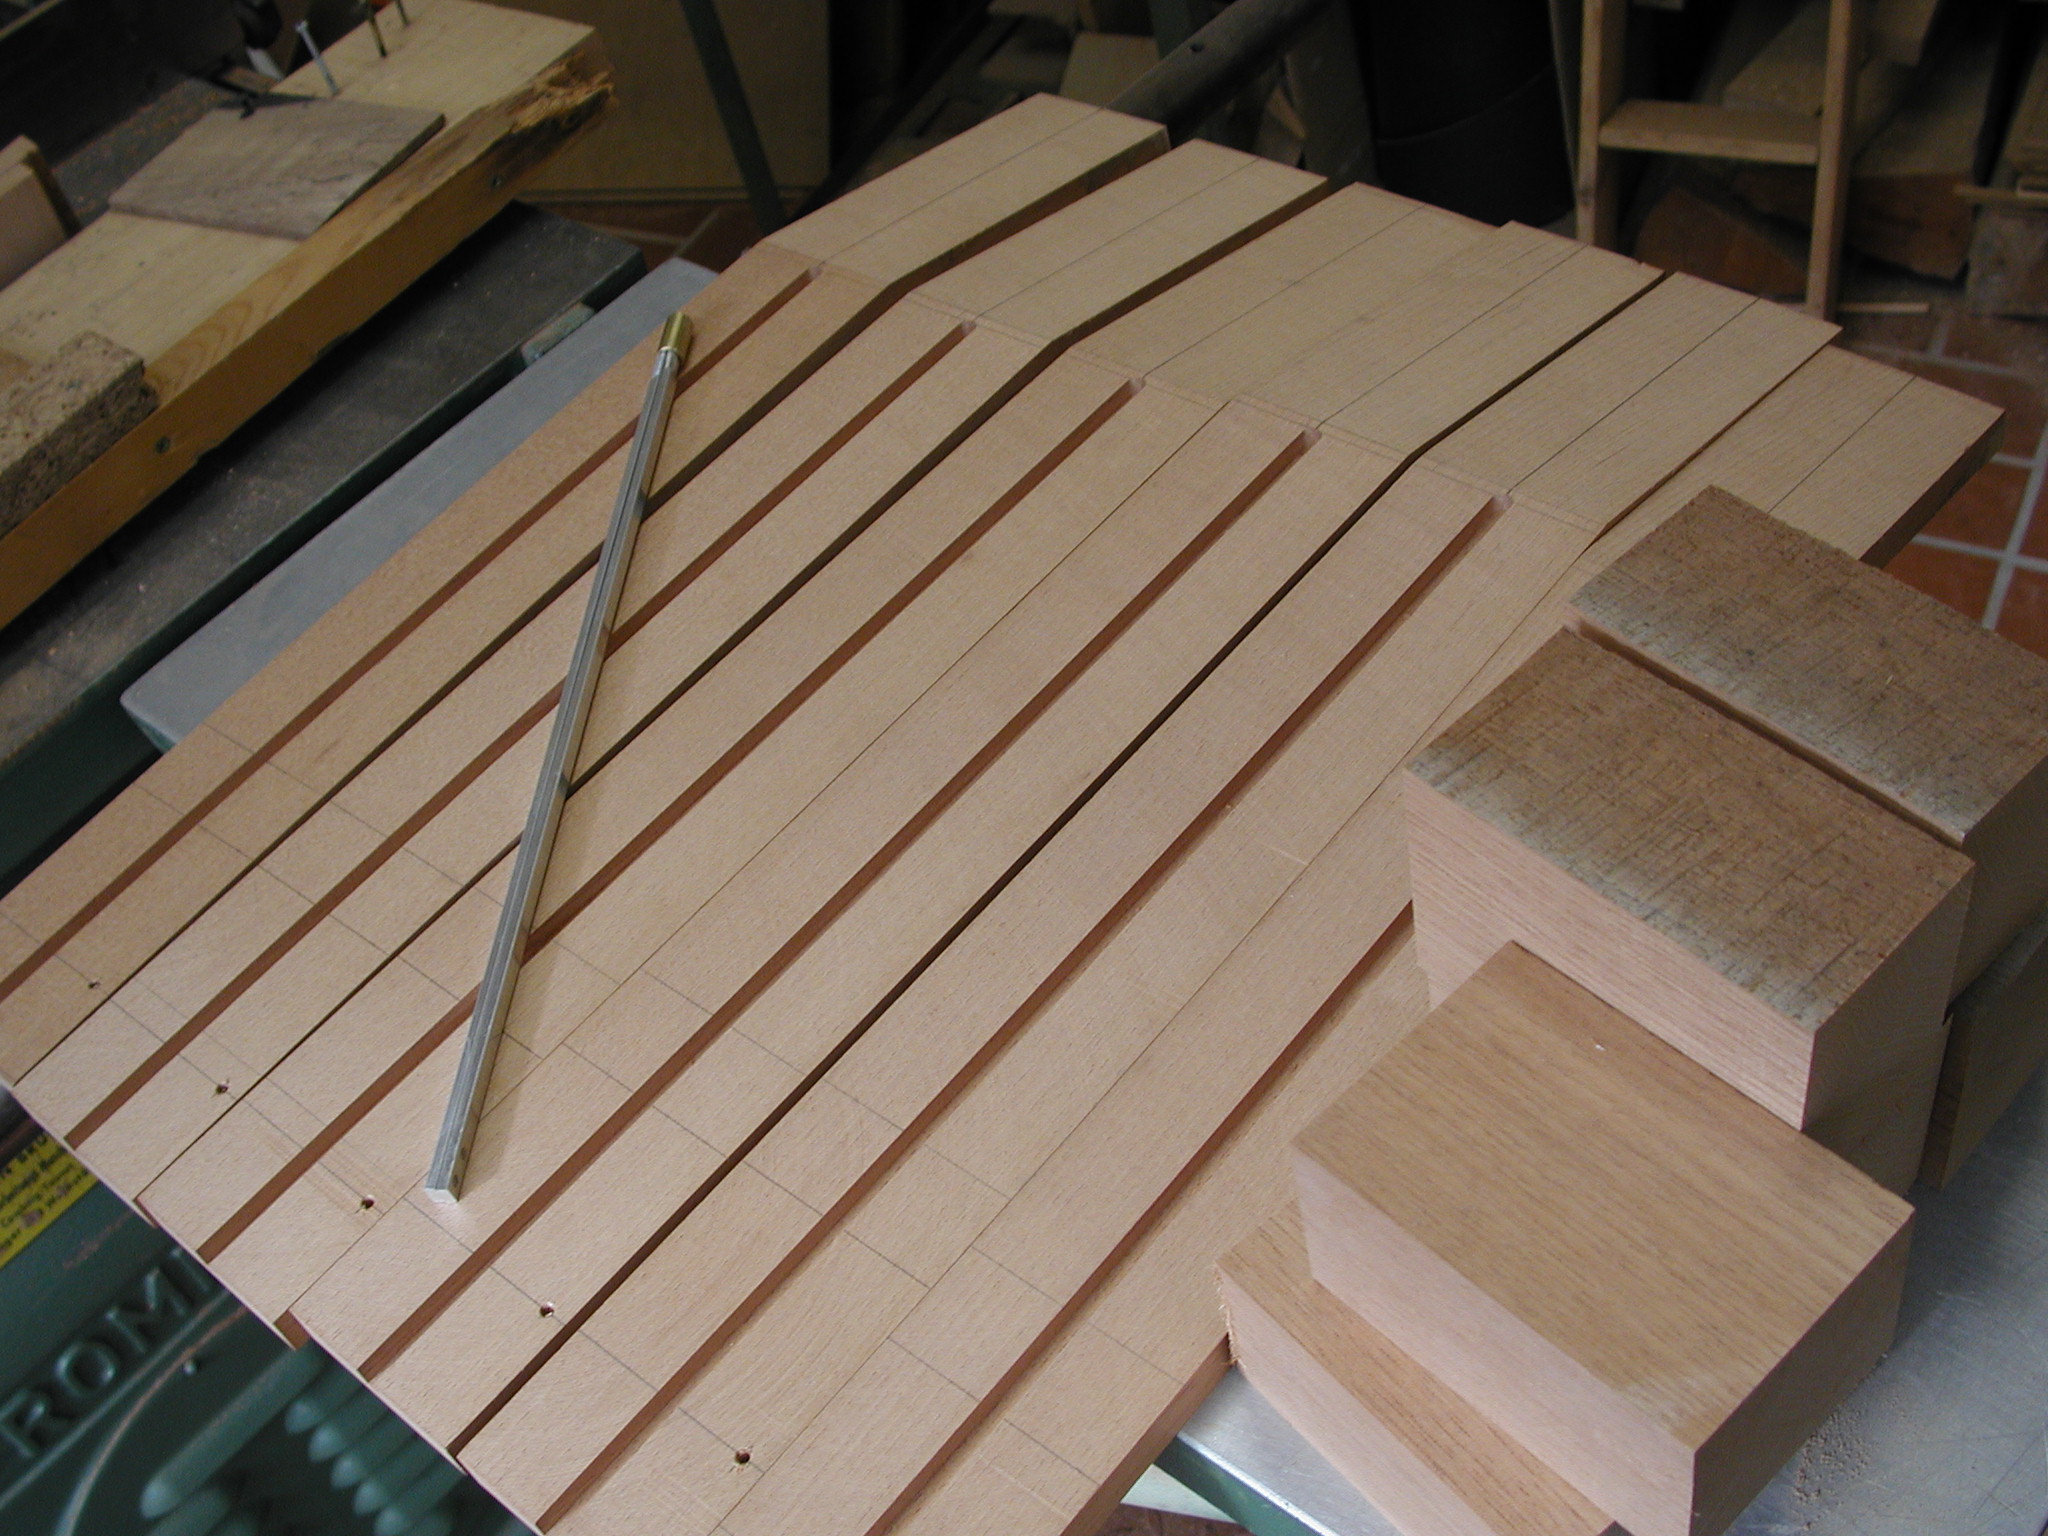 Neck: The necks are cut, the channel for the trussrod is milled